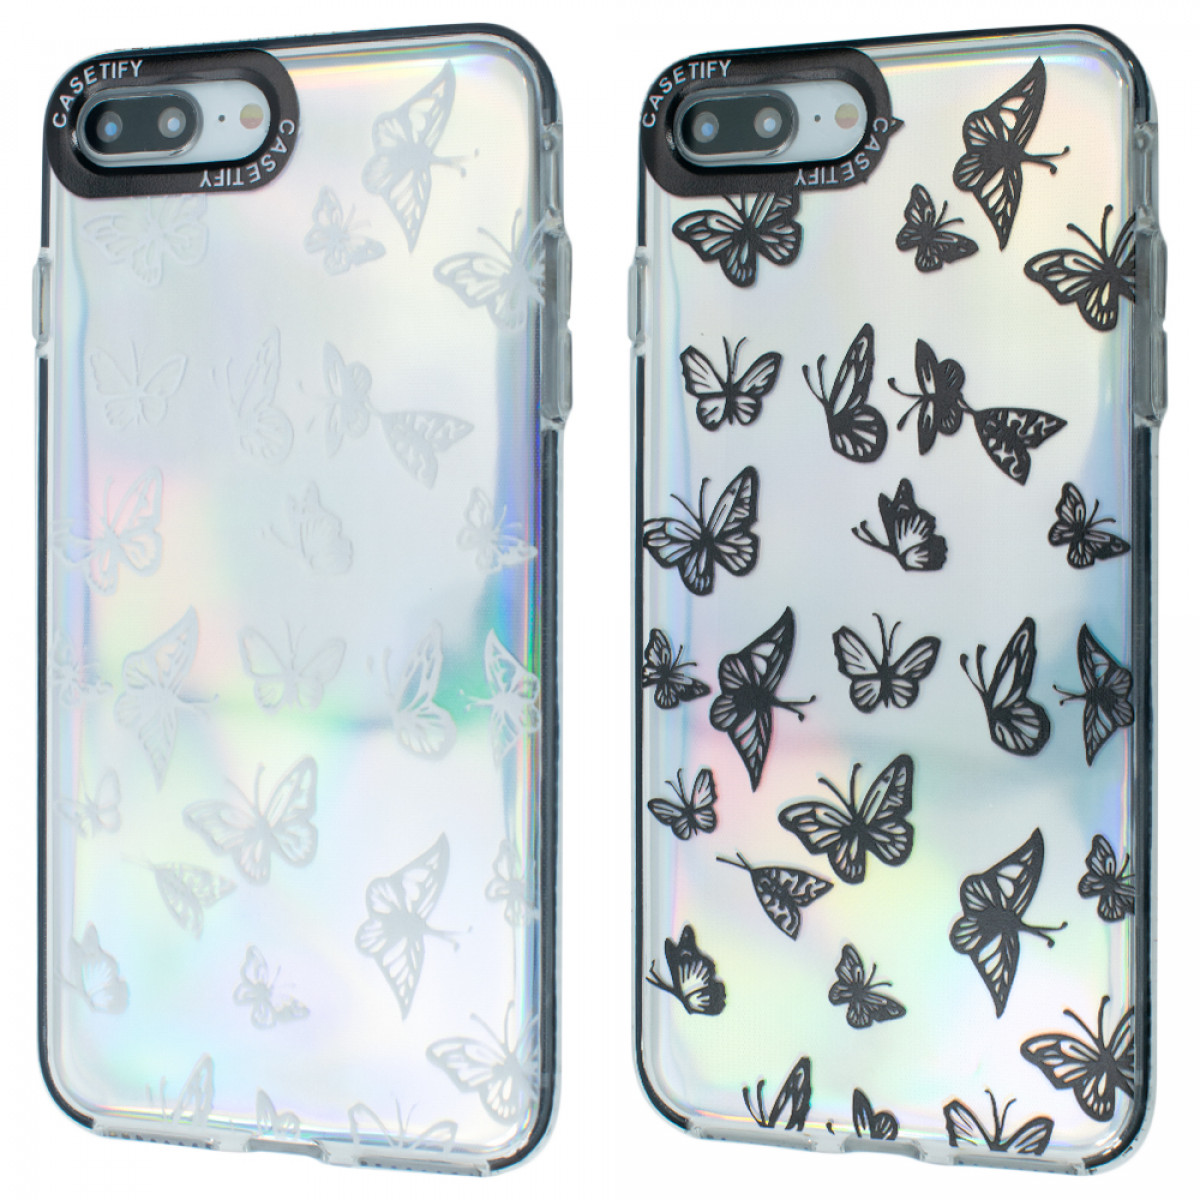 TPU Gradient Case Butterfly Apple Iphone 7/8 Plus